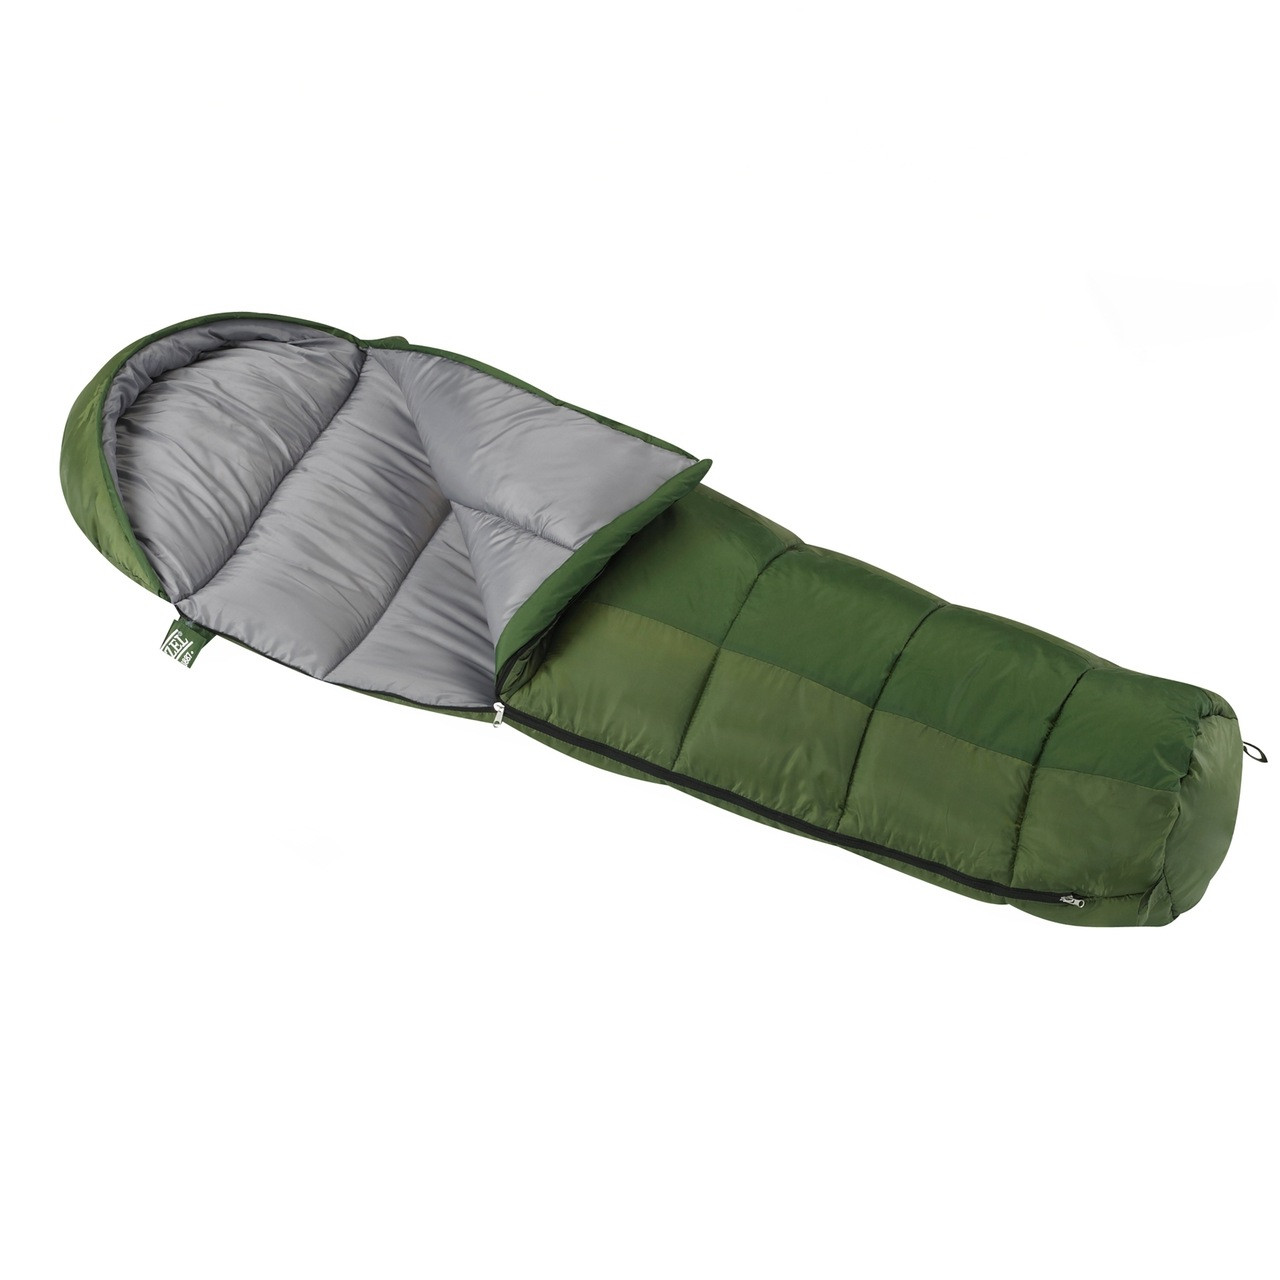 Wenzel Kids Backyard 30 degree sleeping bag , green, laying flat partially unzipped with the corner partially folded over showing the gray interior of the sleeping bag